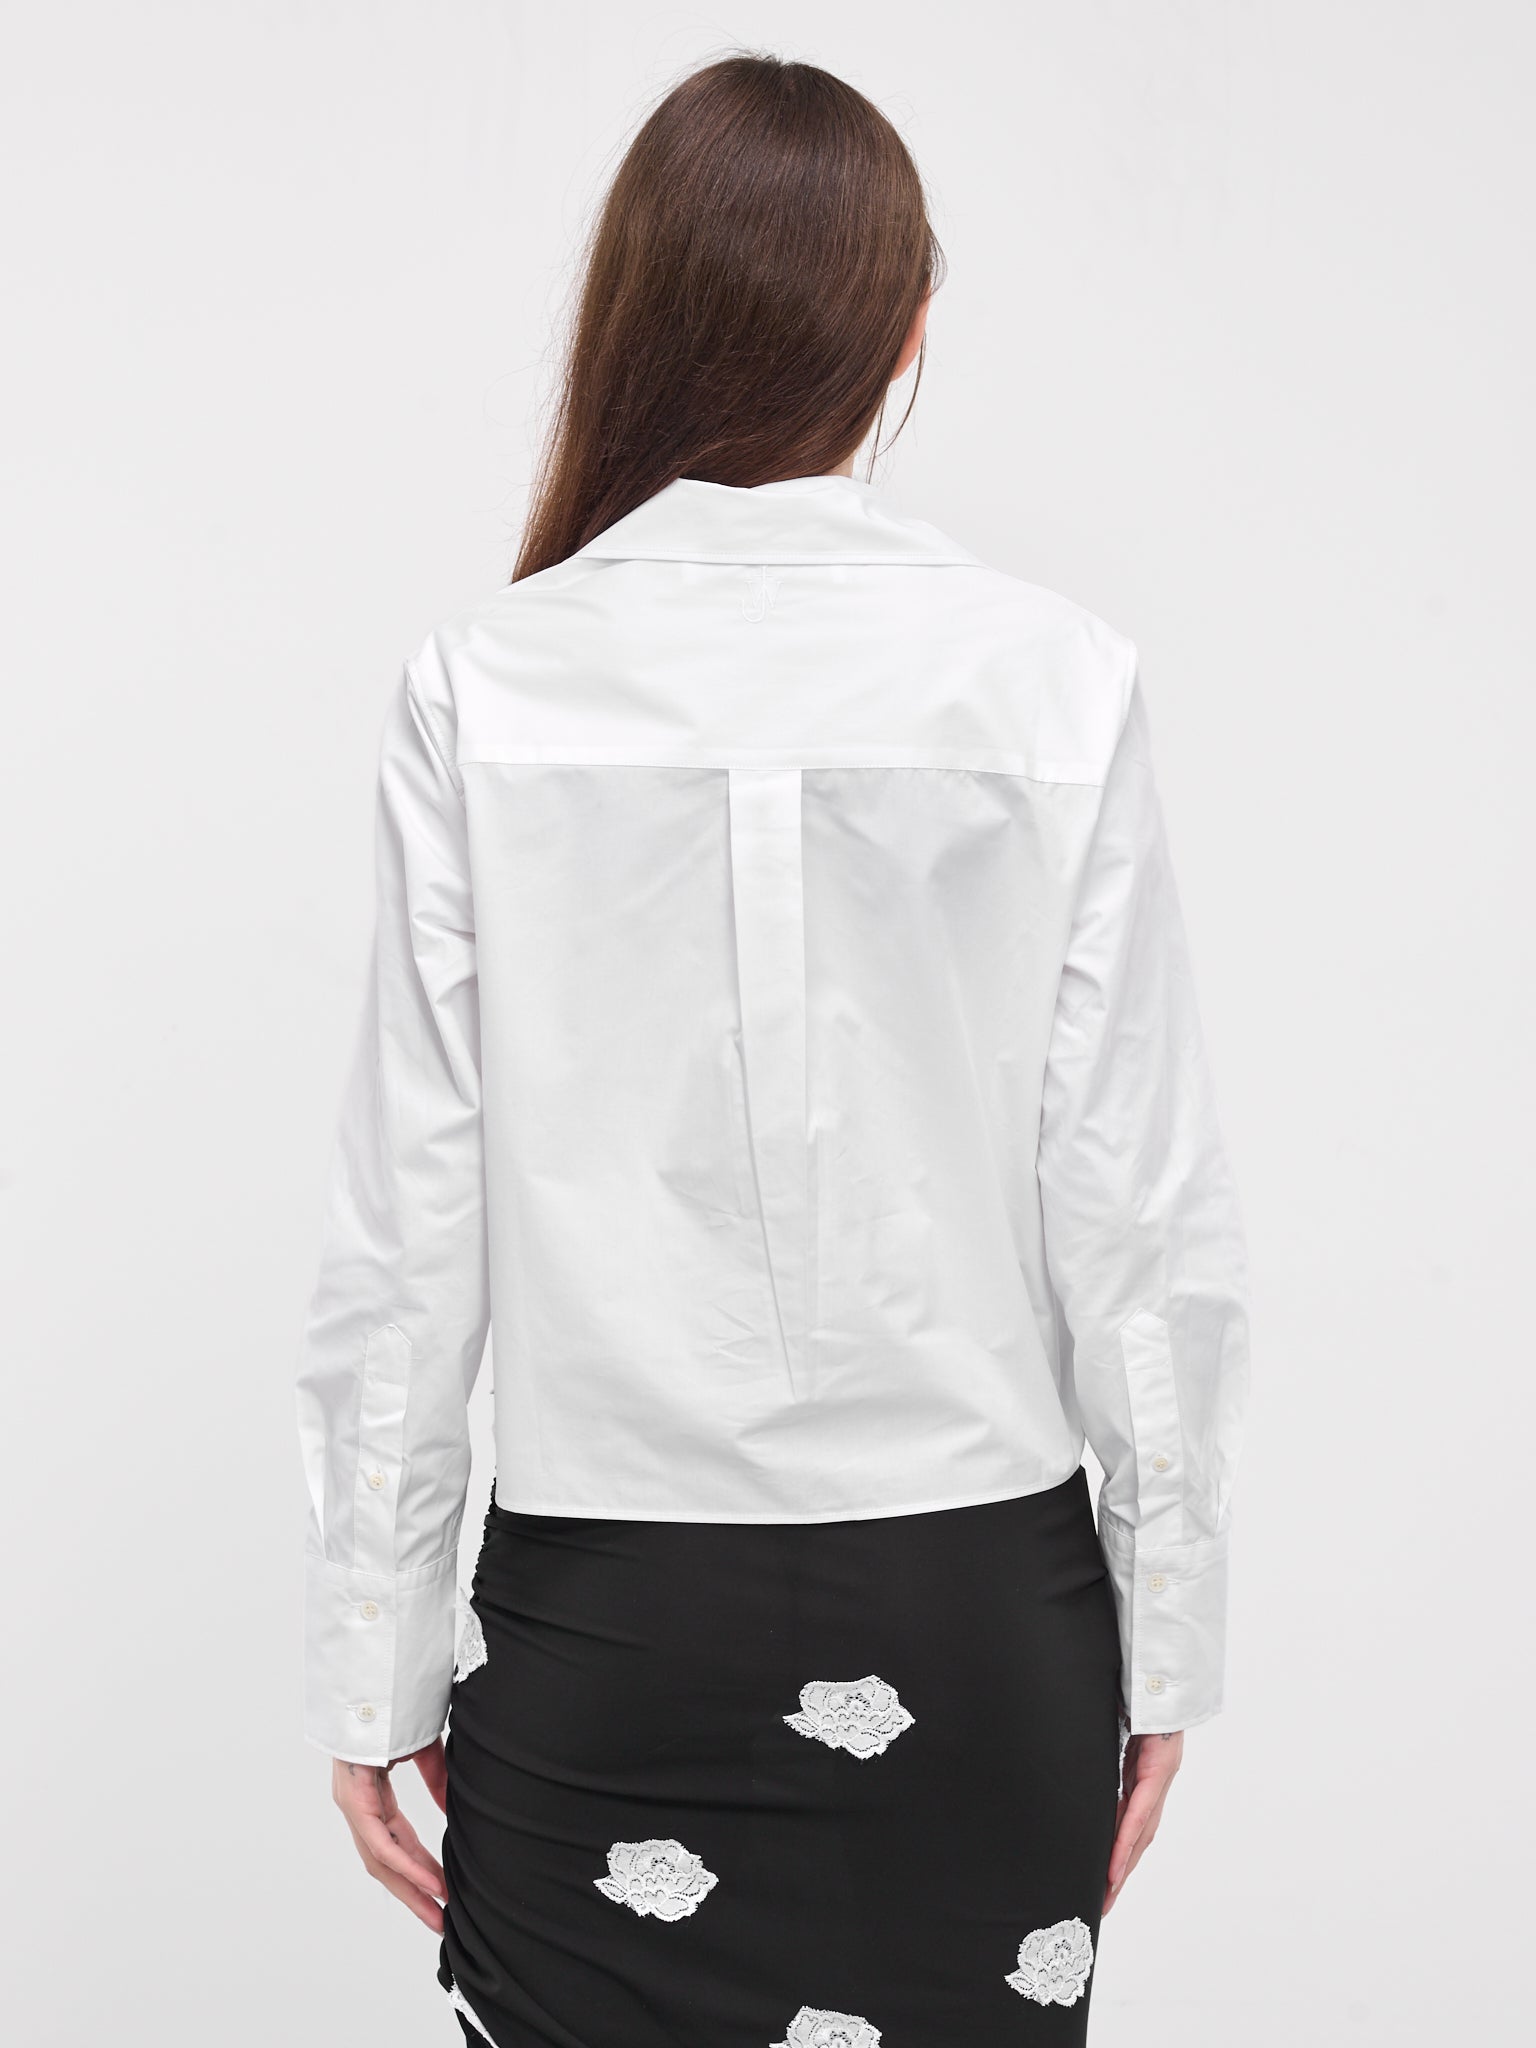 Bow Tie Cropped Shirt (SH0312-PG1090-WHITE)